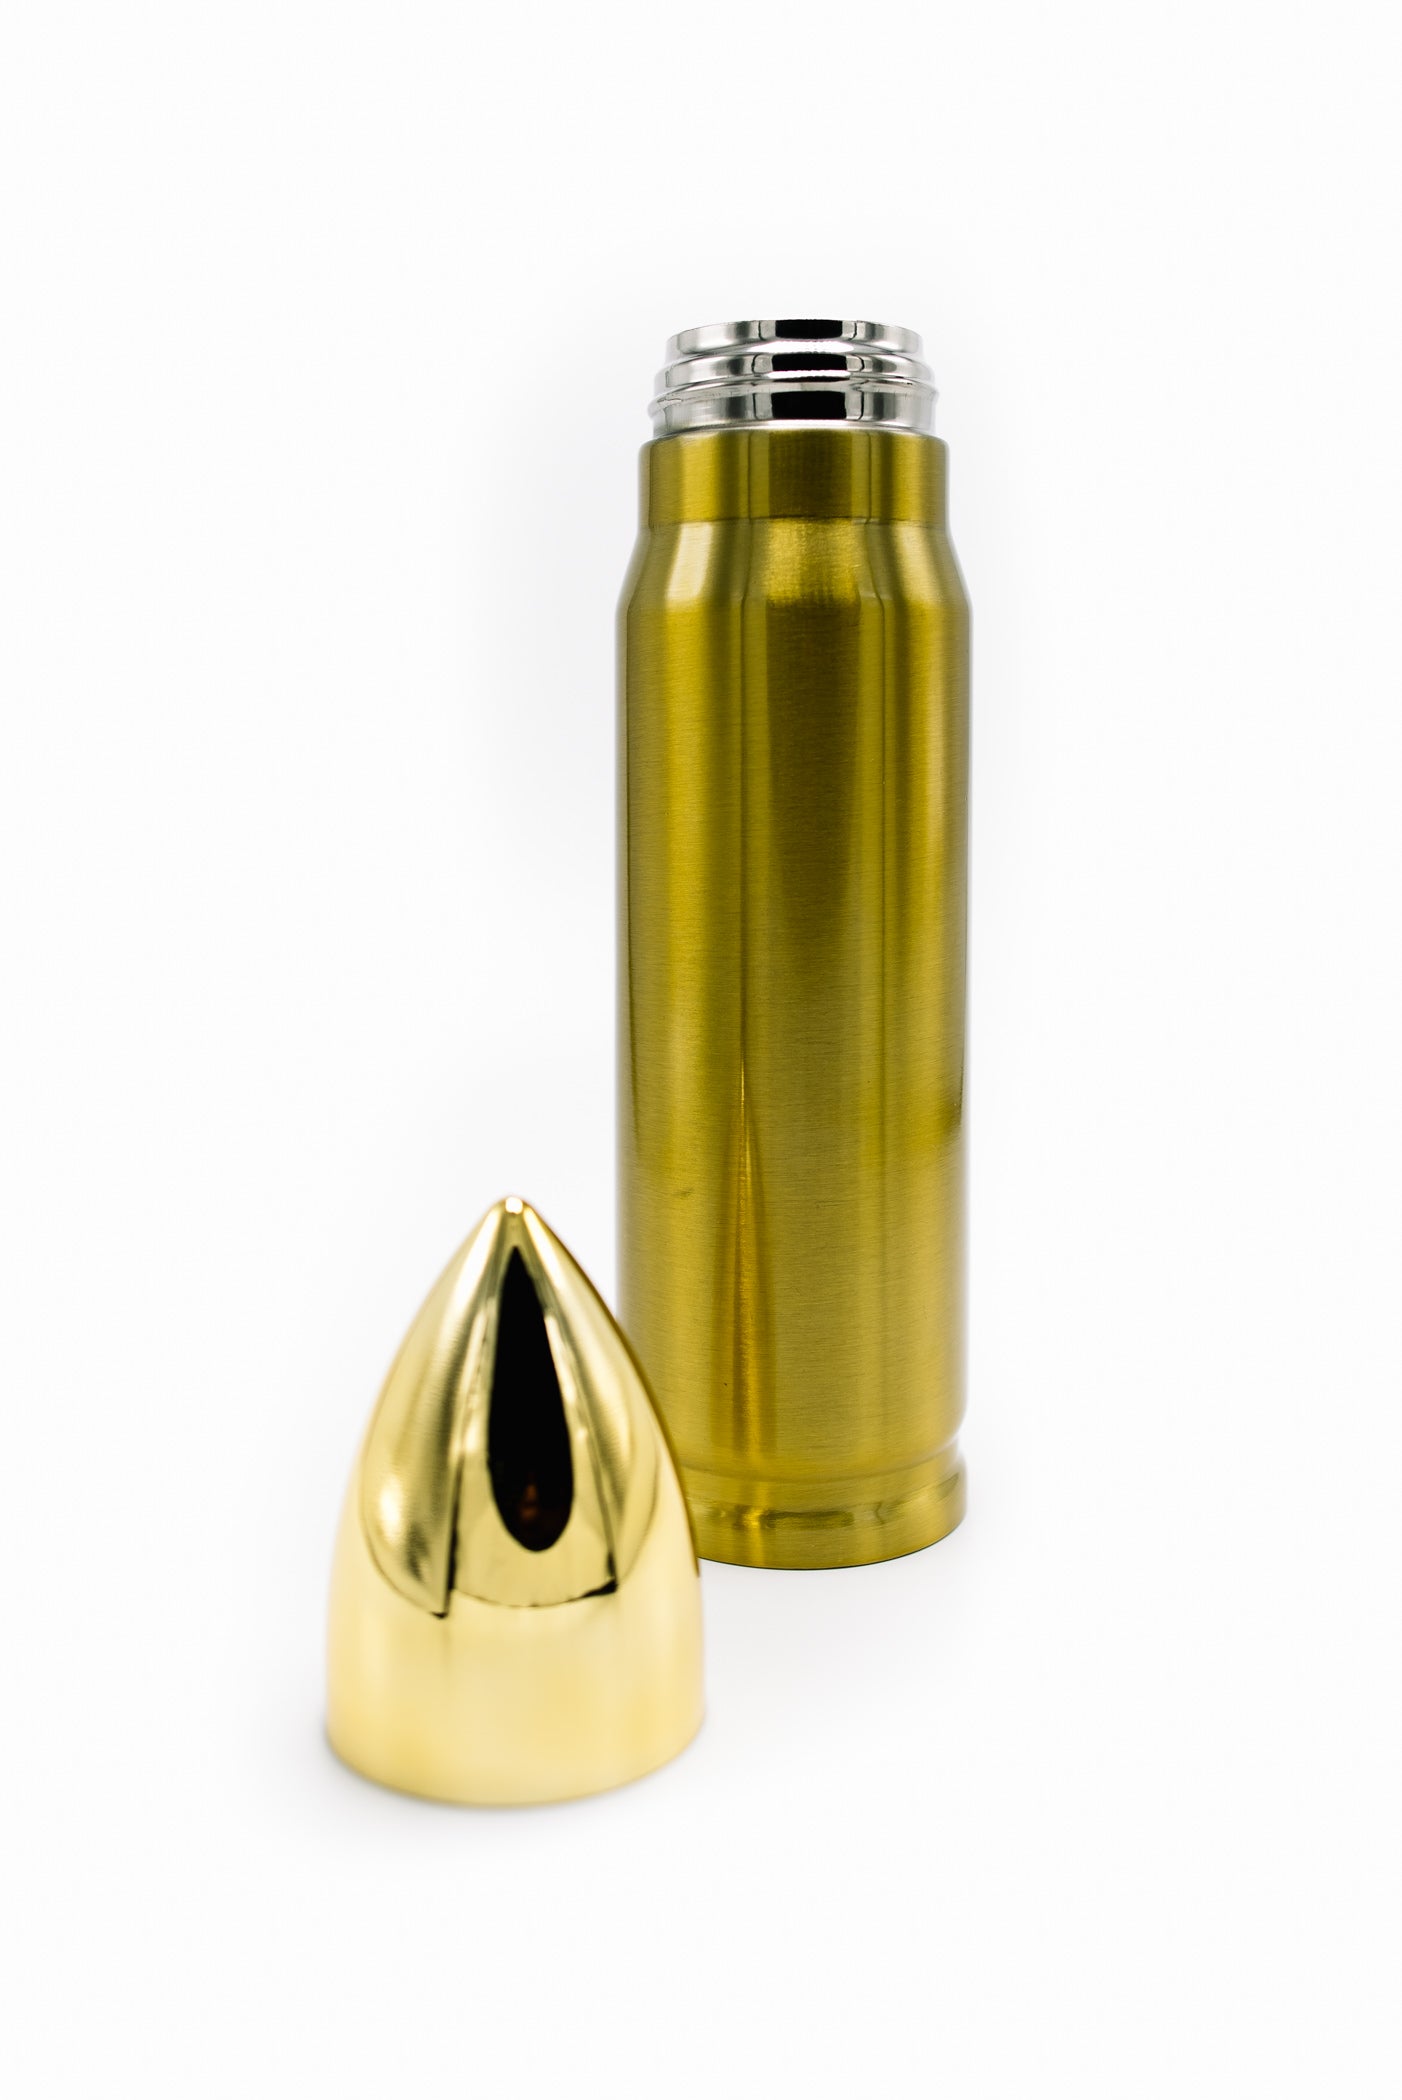 Bullet Shaped Thermos Bottle 17 Ounces, Vacuum Insulated - Great for your  Camping Accessories or Camping Gear. (Golden)